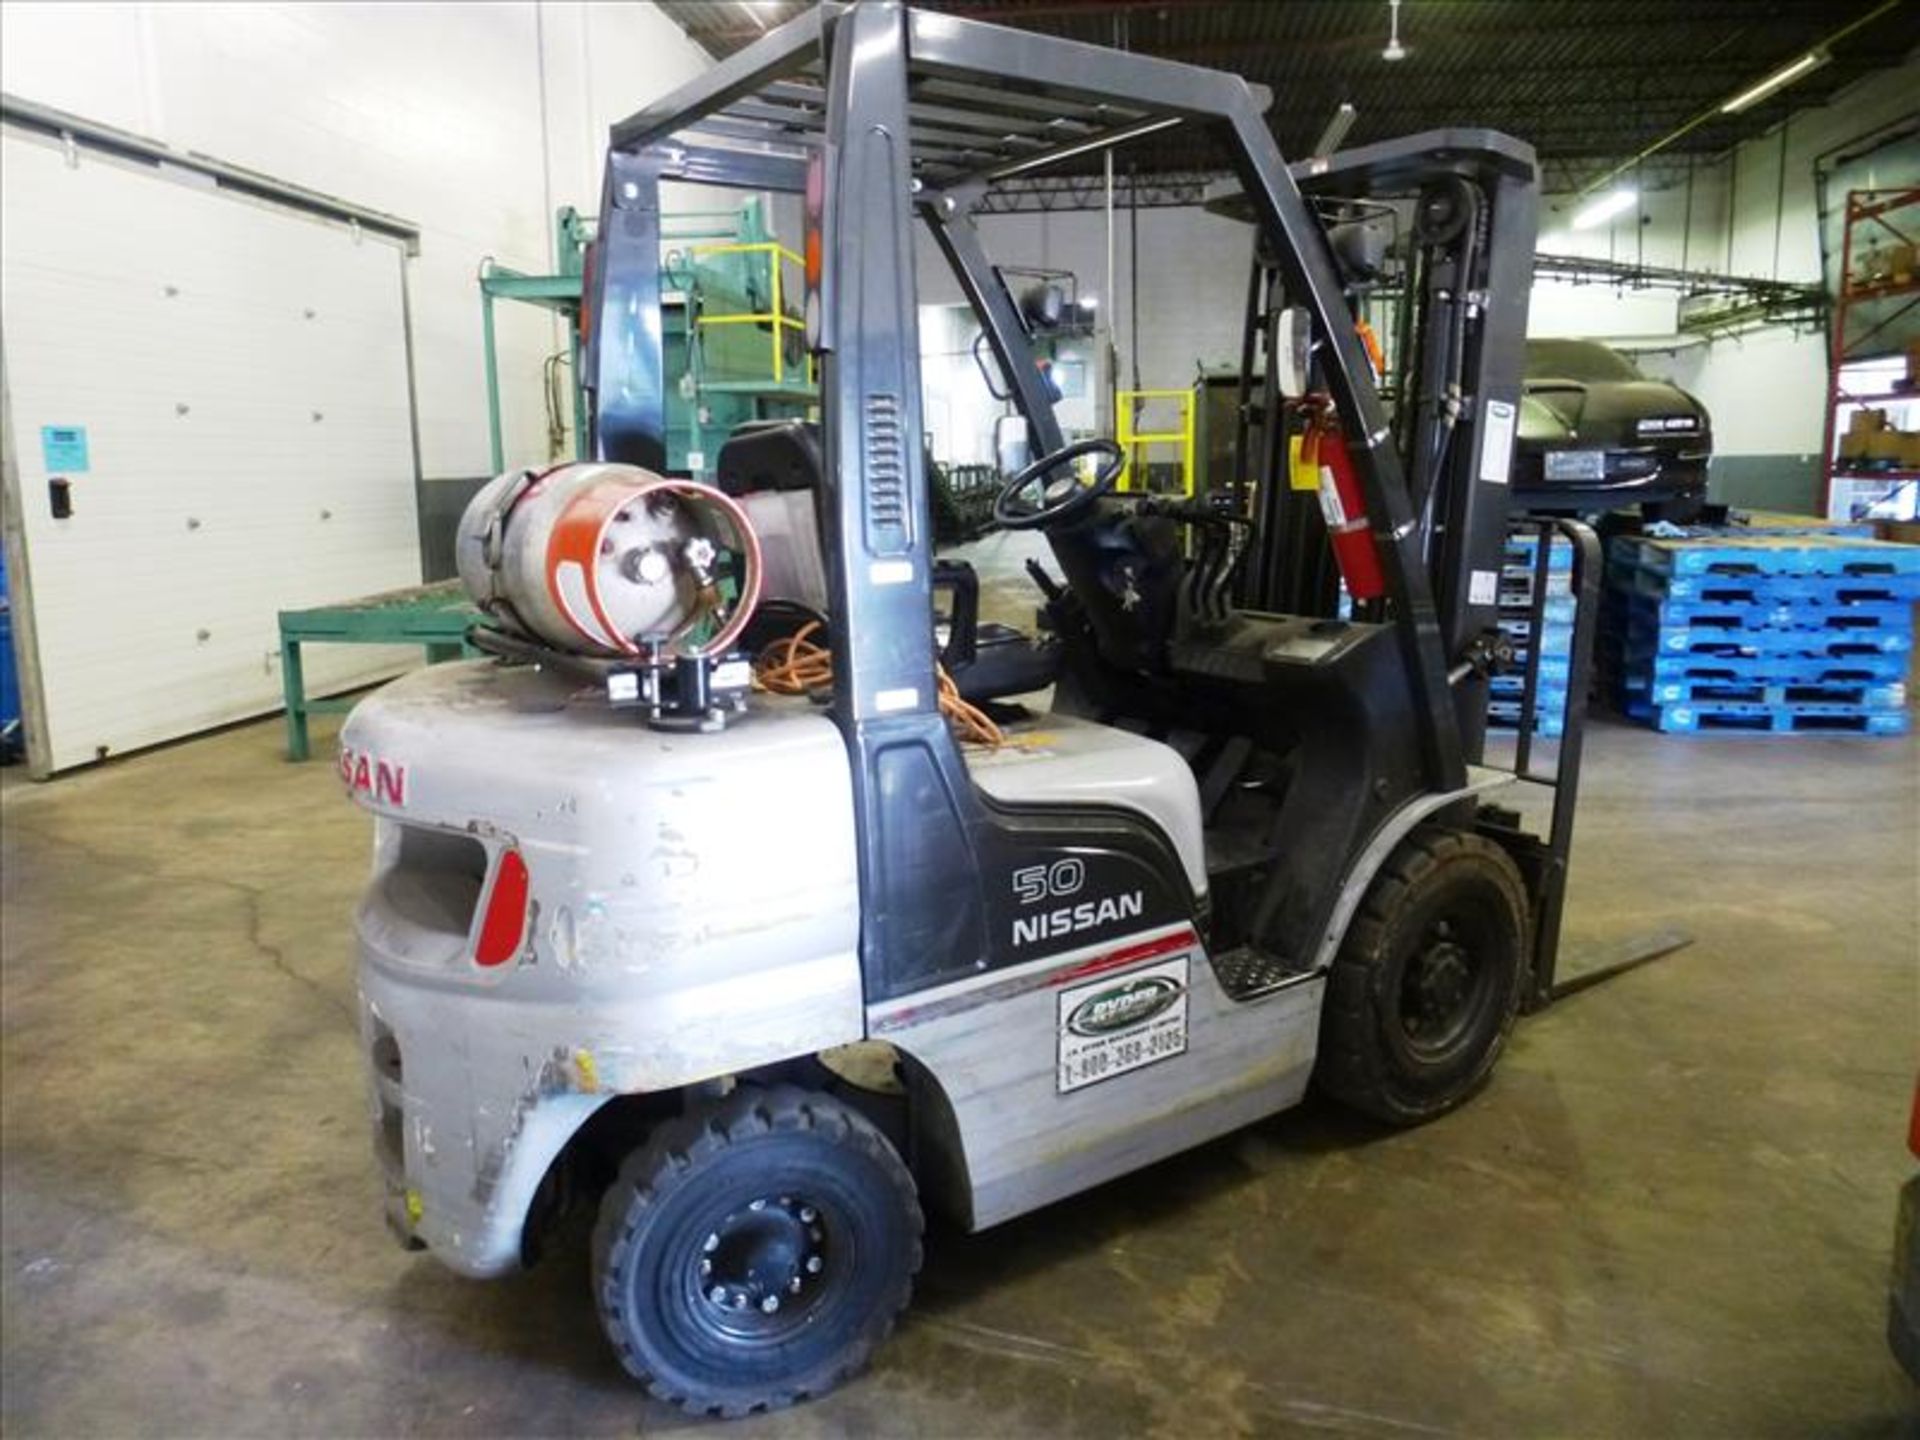 Nissan forklift truck, mod. MP1F2A25LV, ser. no. P1F2-9H1938, 4000 lbs. cap., side-shift, 3-stage - Image 2 of 3